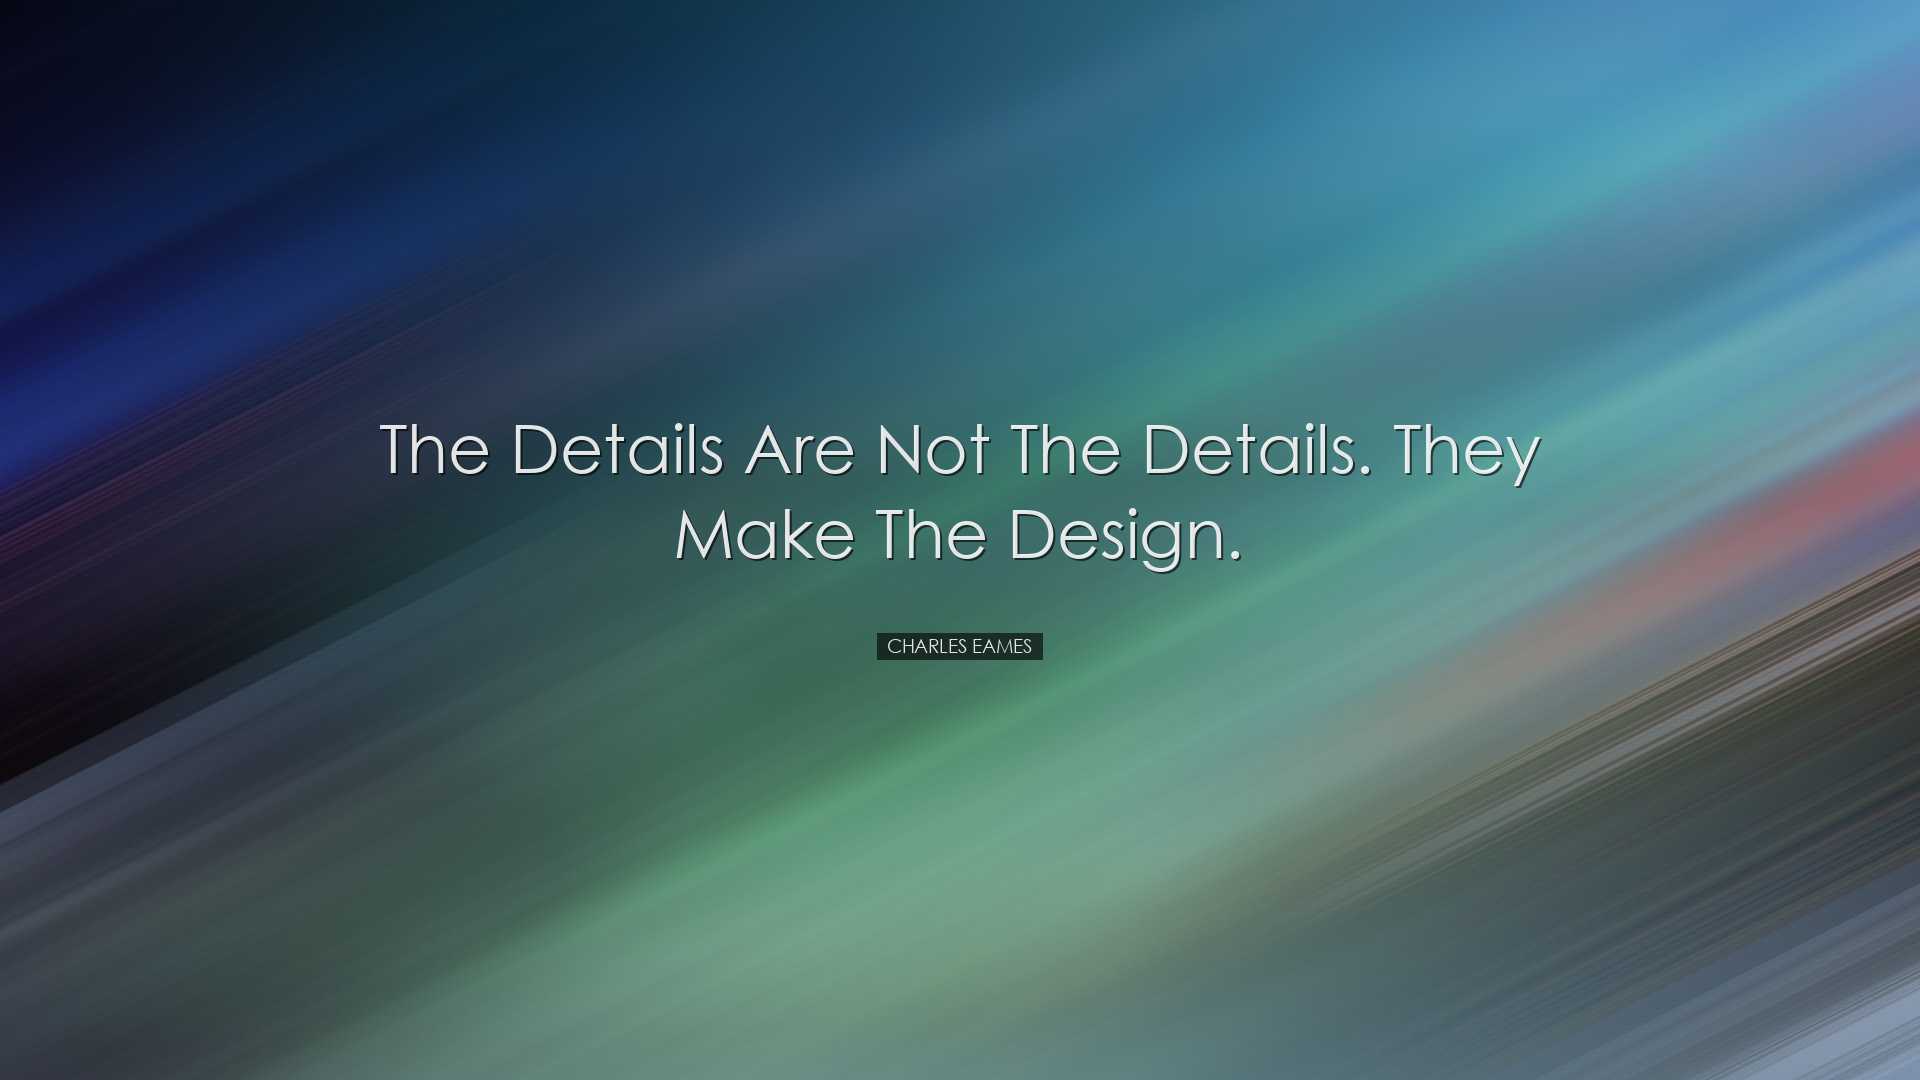 The details are not the details. They make the design. - Charles E